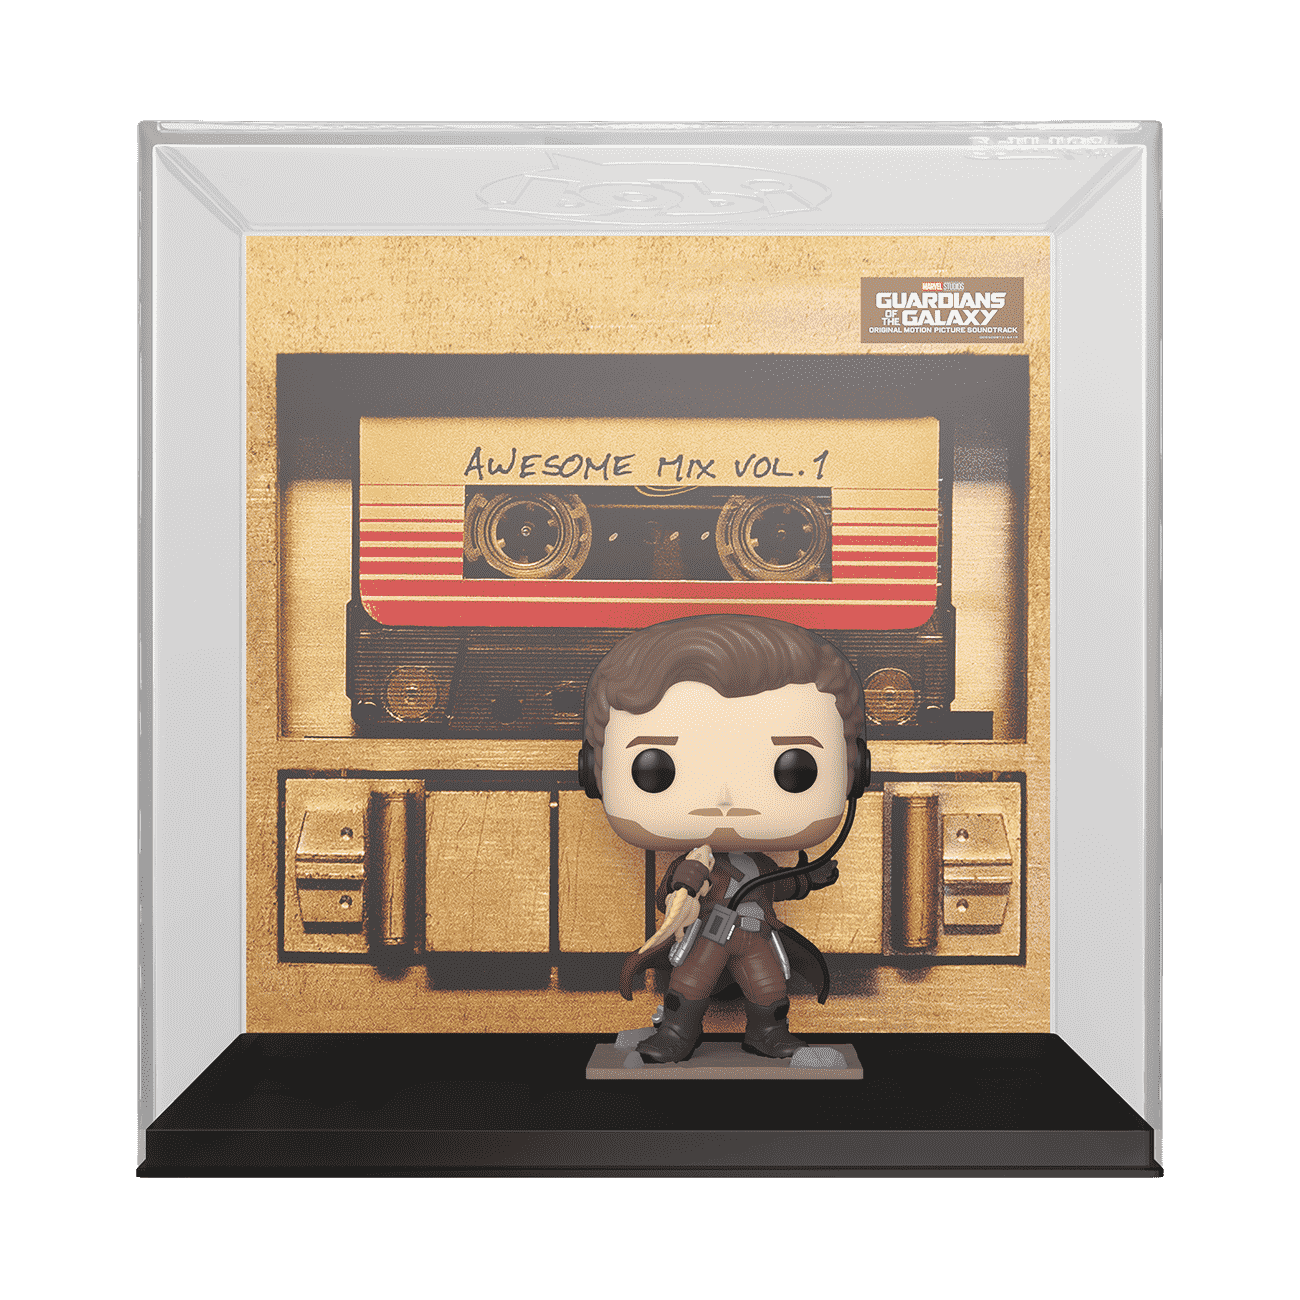 Star Lord With Groot Funko Pop 1125 Protector -  Norway